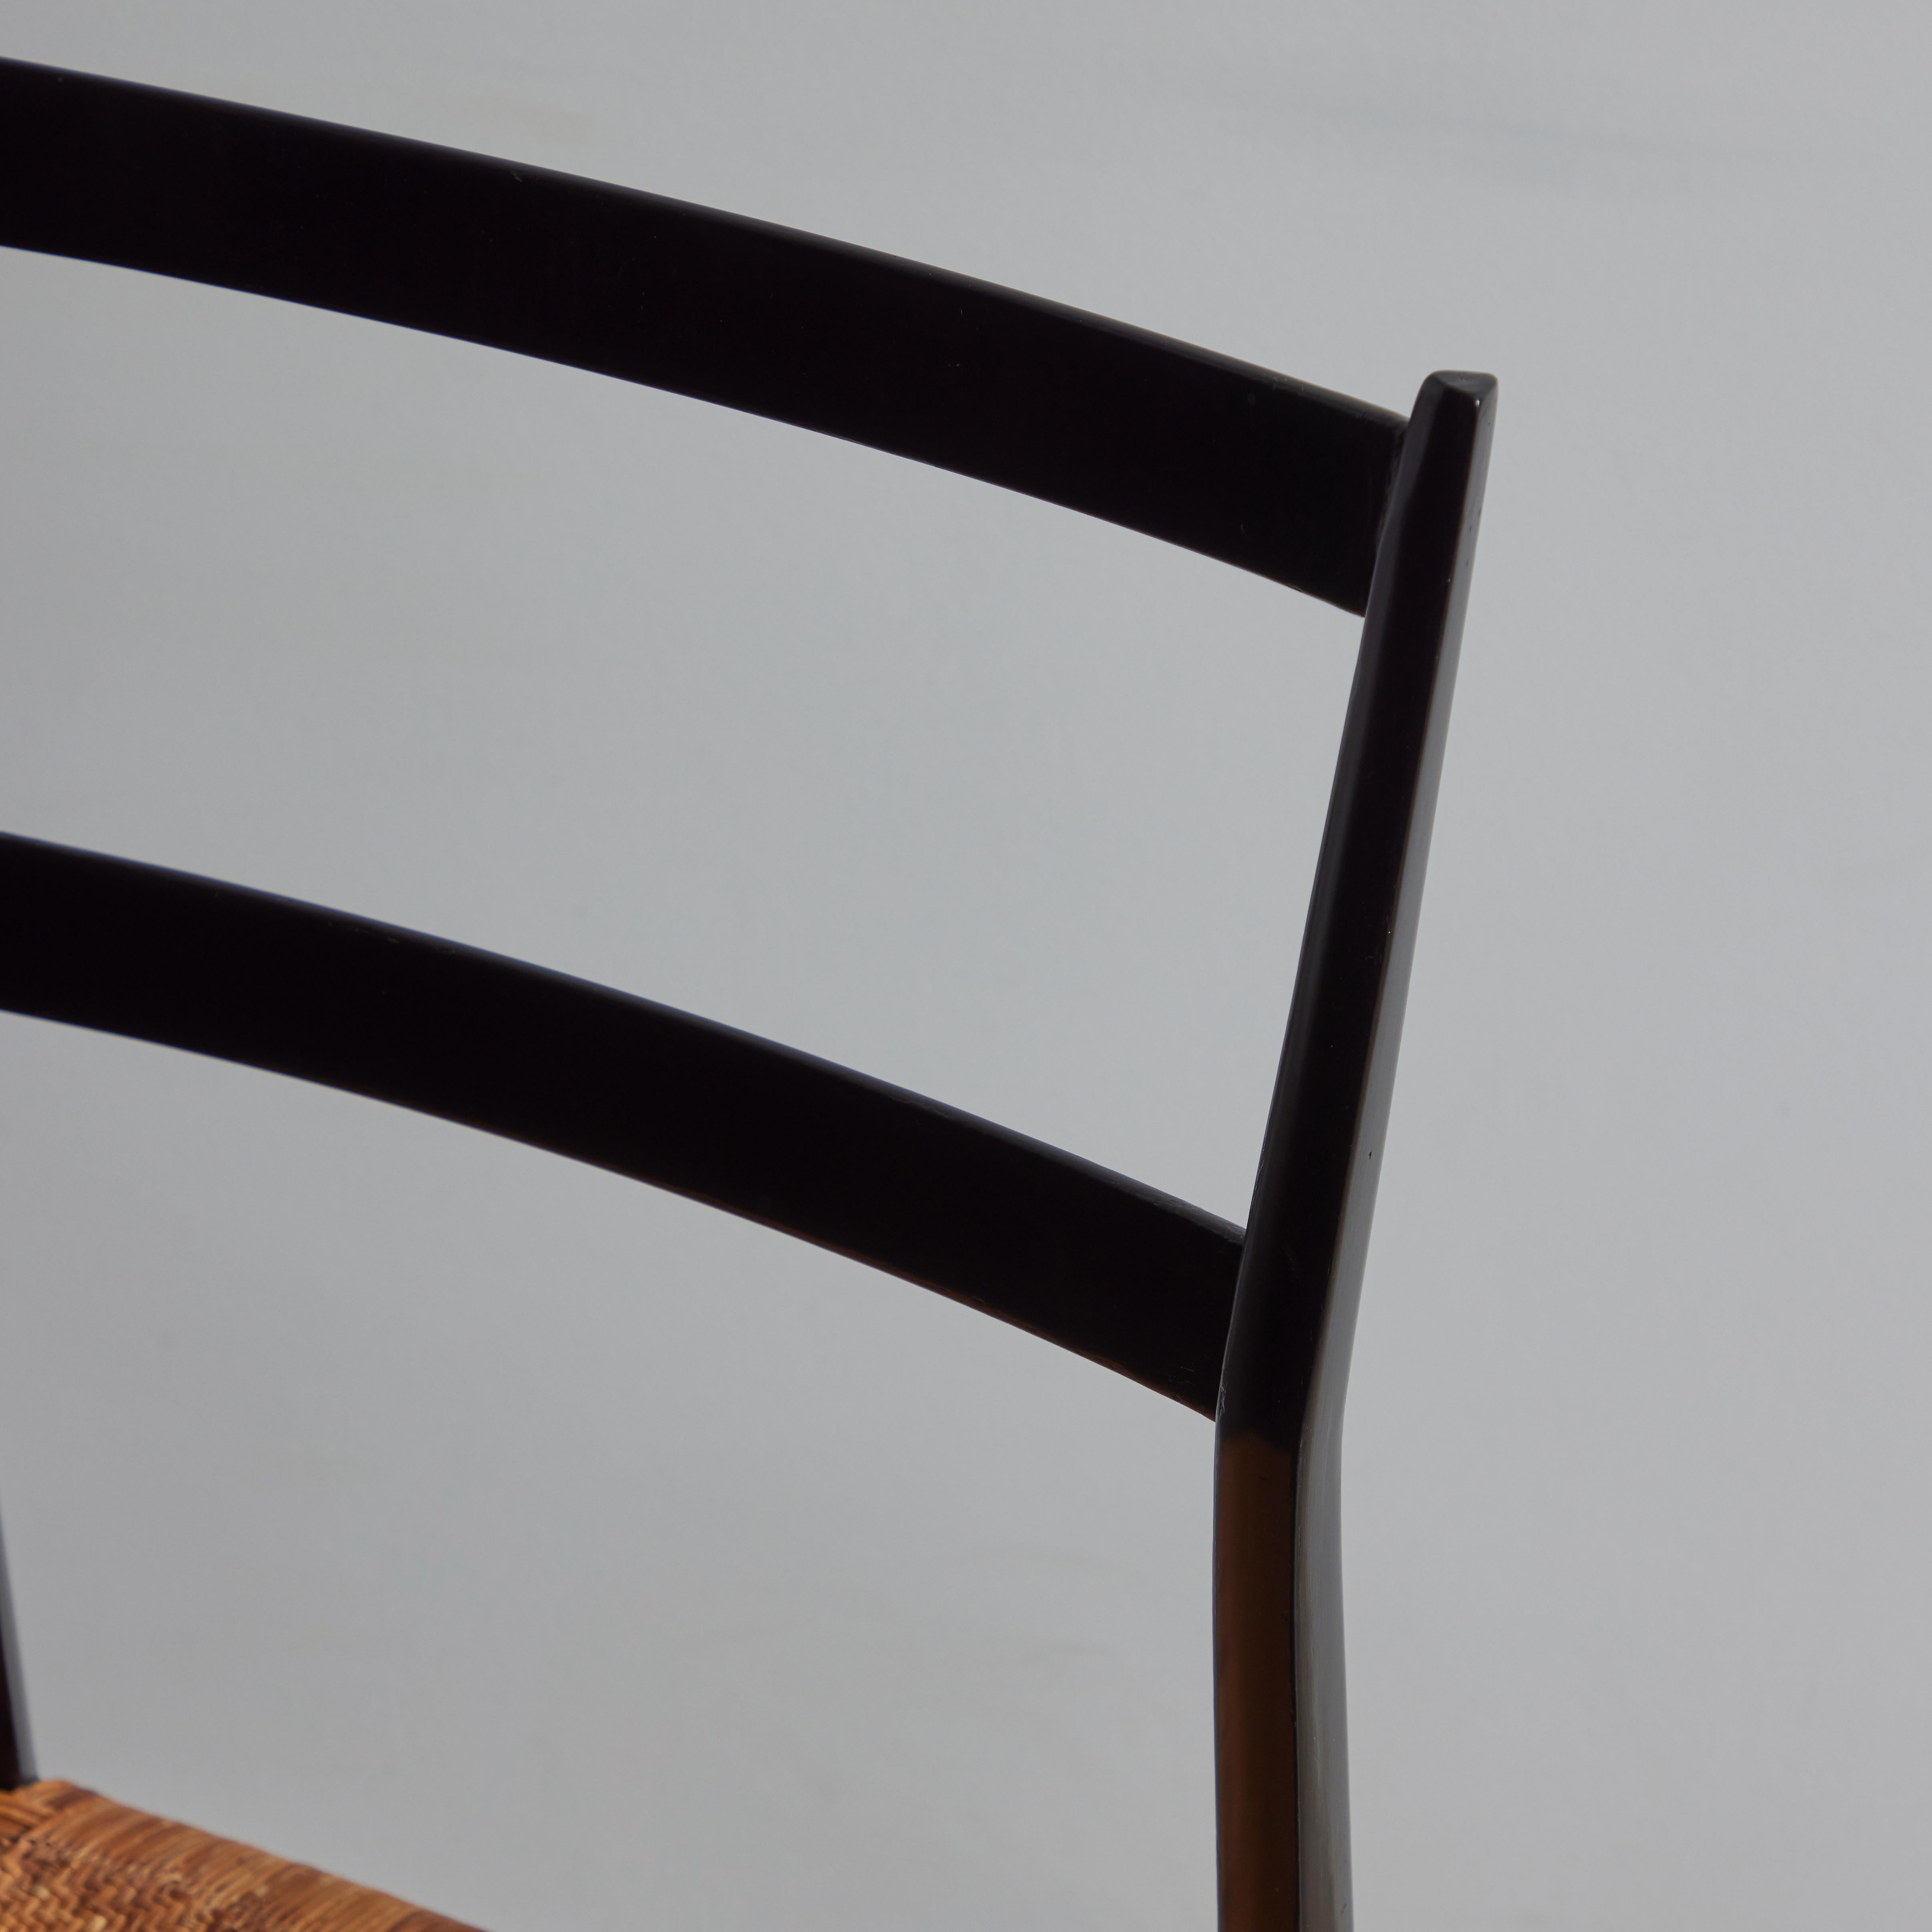 Early Set of Four Superleggera Chairs by Gio Ponti For Sale 5